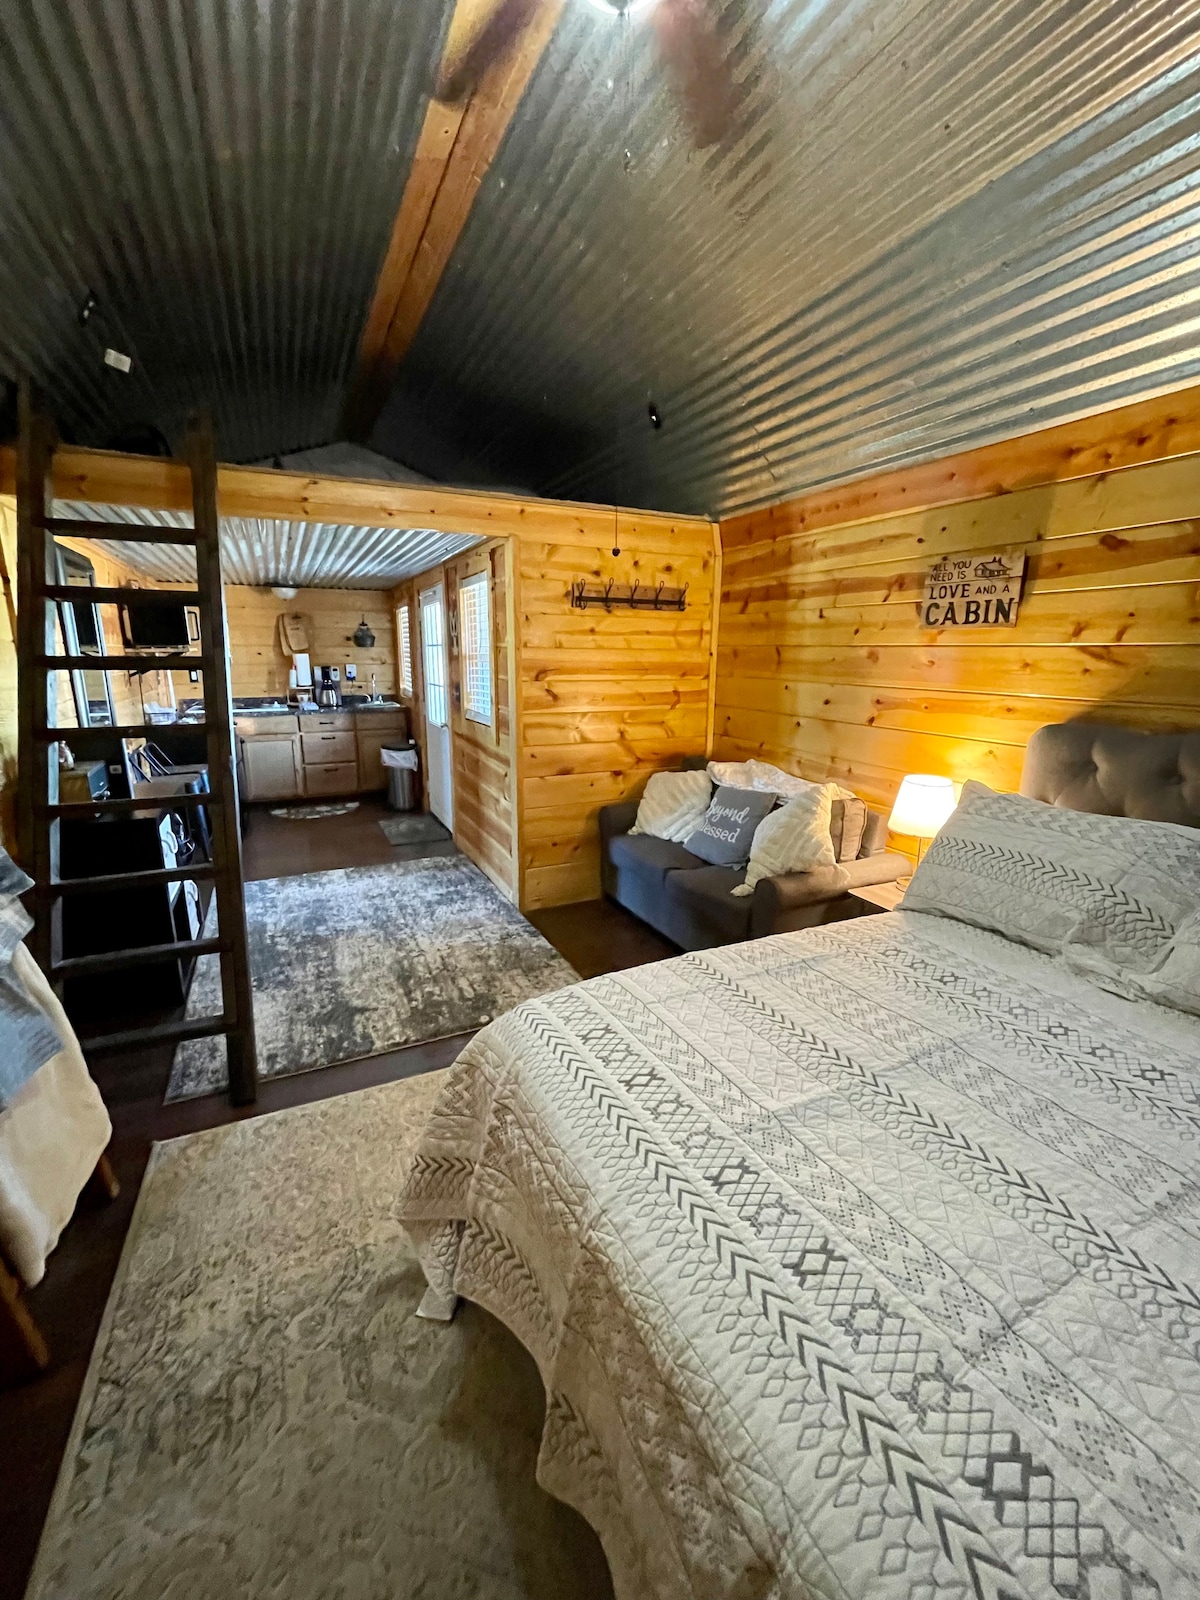 The Owl 's Nest Cabin at Still Waters Edge Retreat